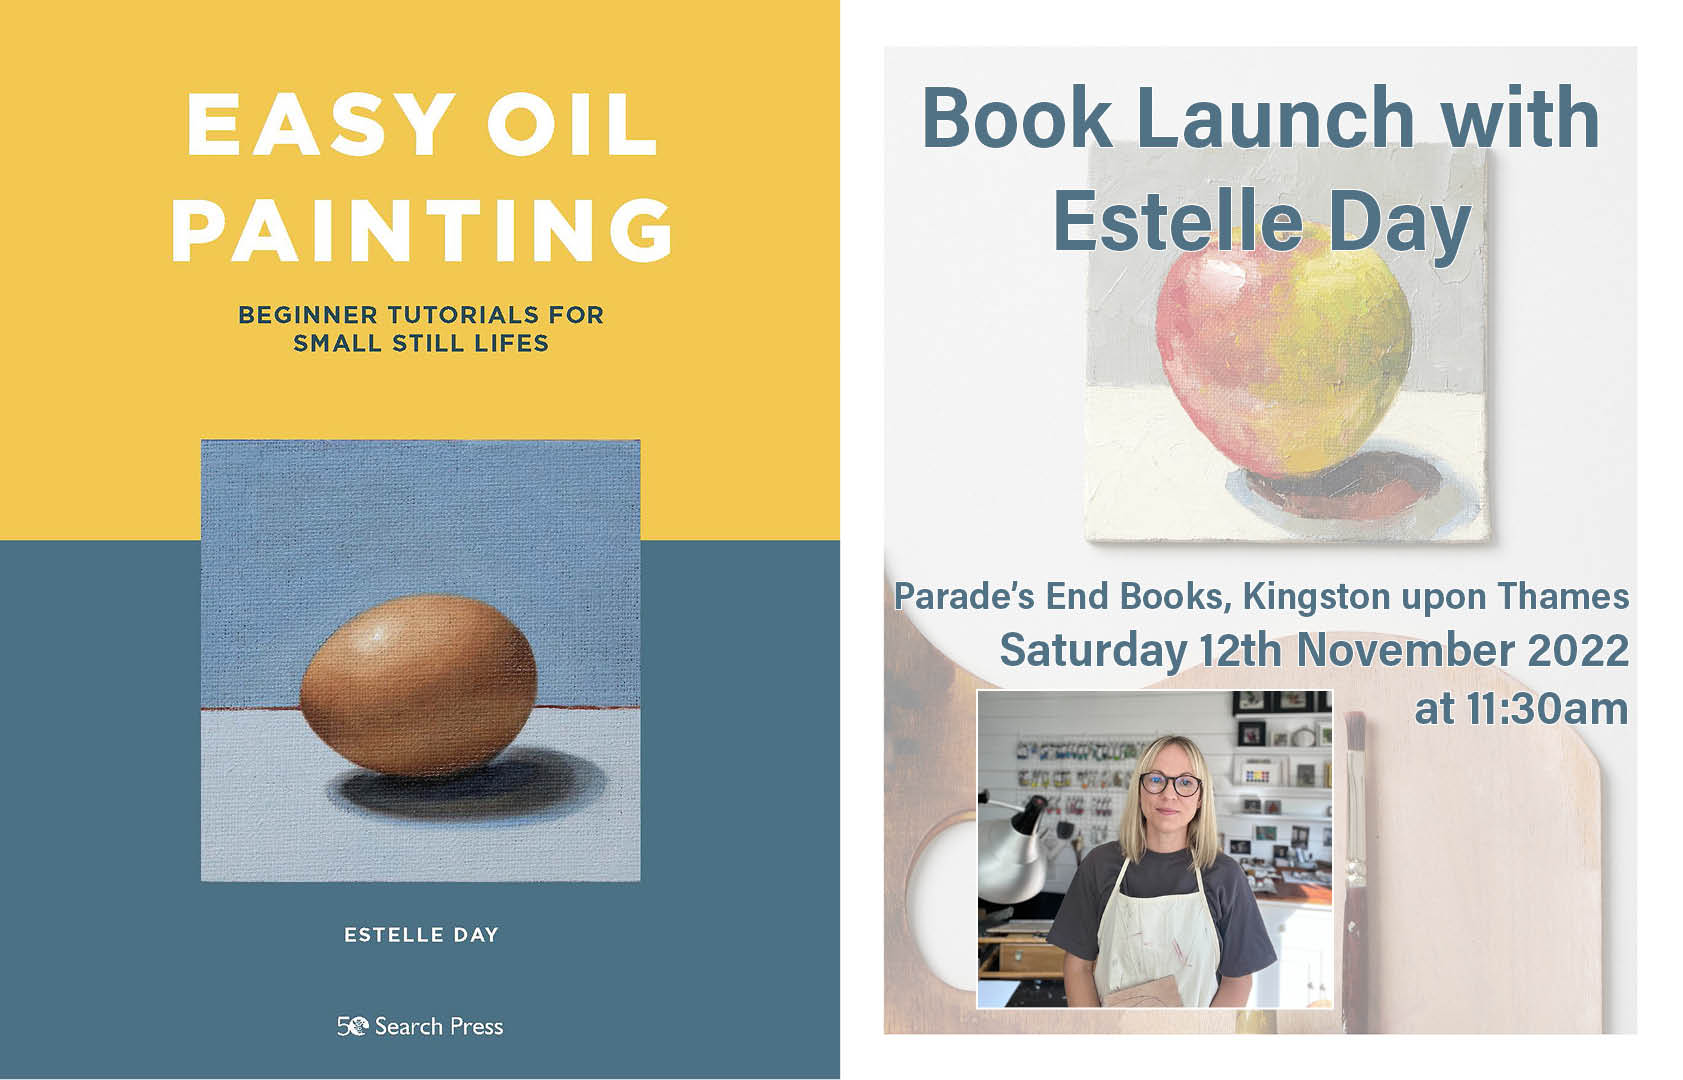 Easy Oil Painting Book Launch with Estelle Day – Parade's End Books